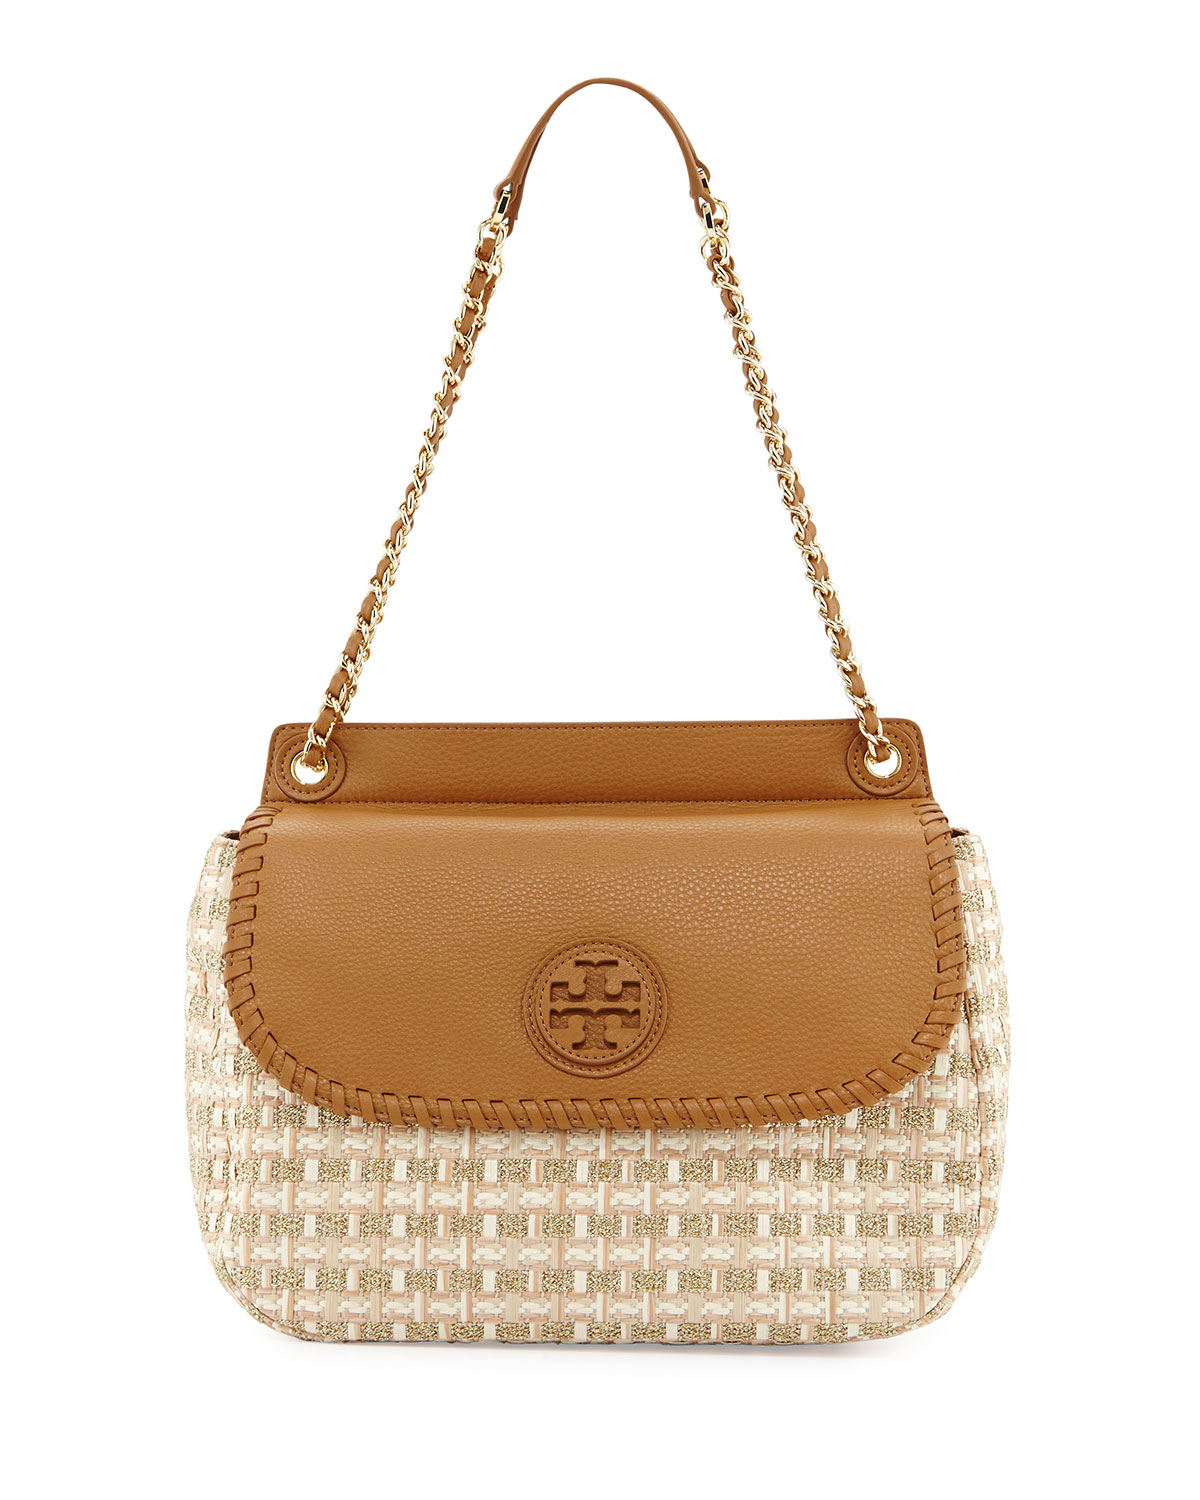 Tory burch Marion Woven Straw Saddle Bag in Beige (GOLD WEAVE) | Lyst